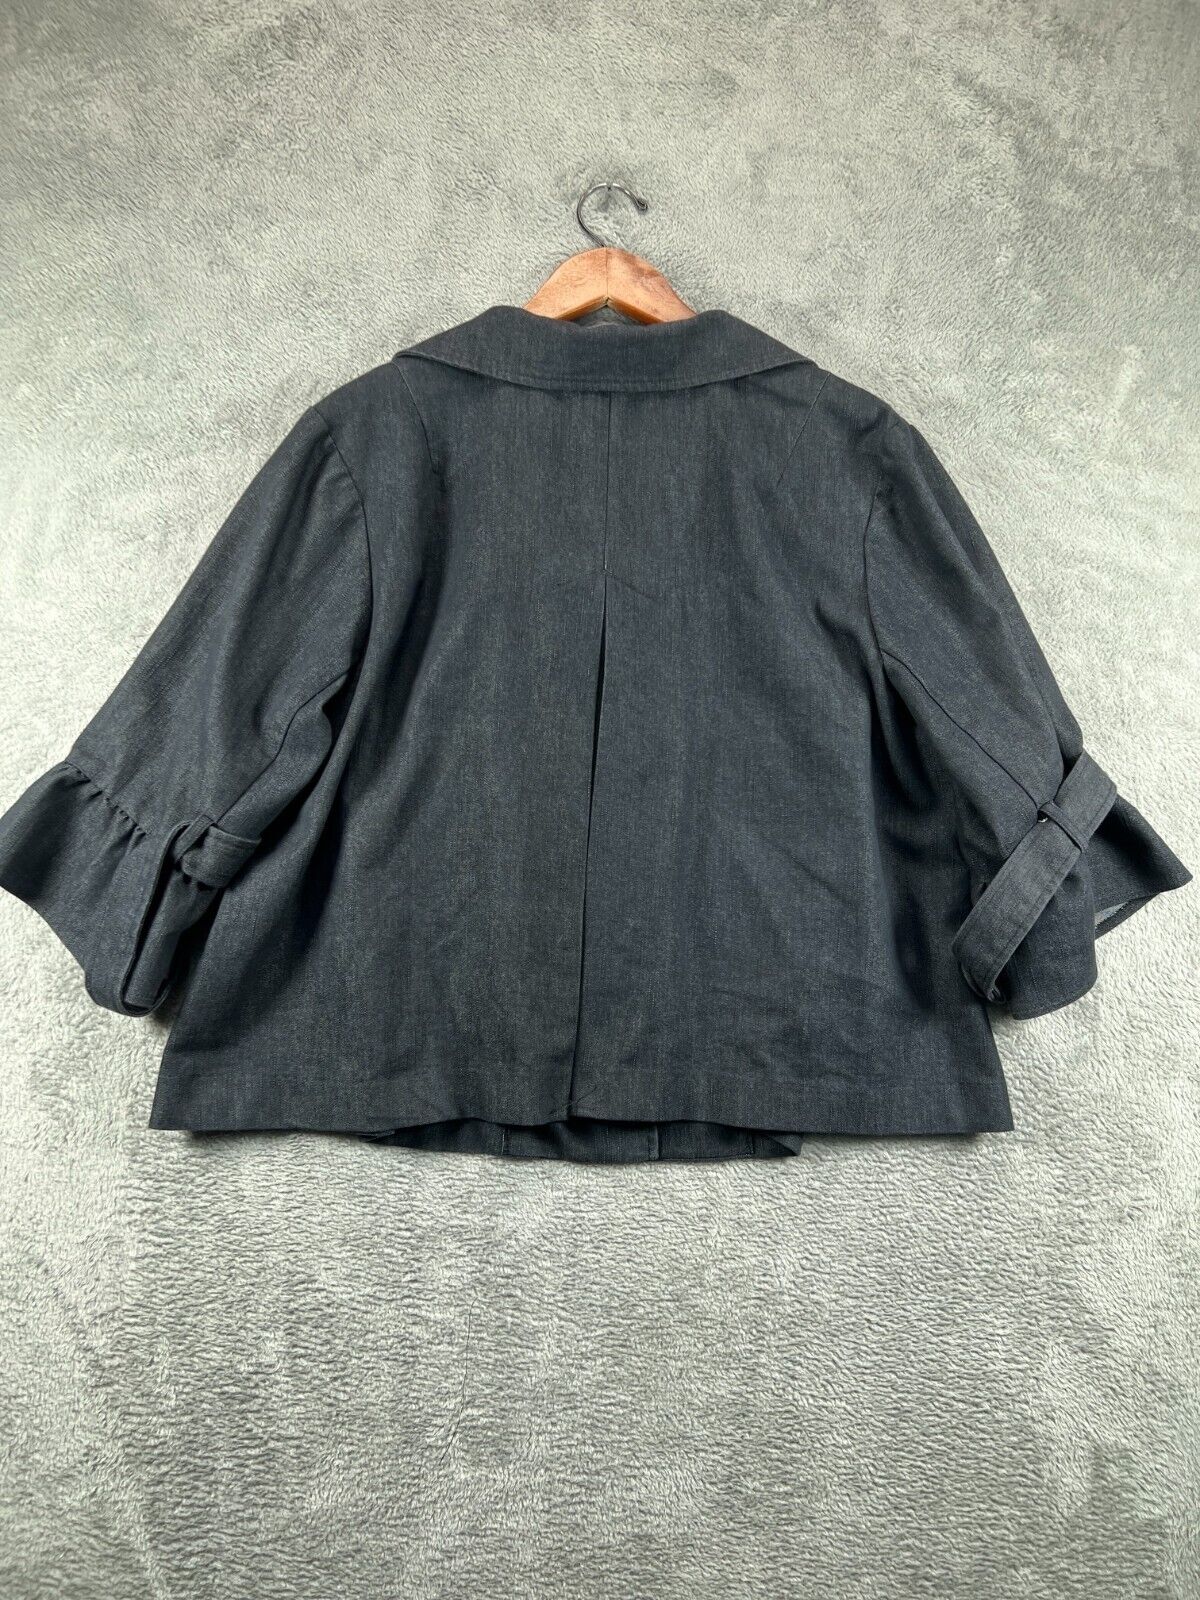 Womens Jackets 18/20W Cato Black 3/4 Bell Sleeve … - image 6